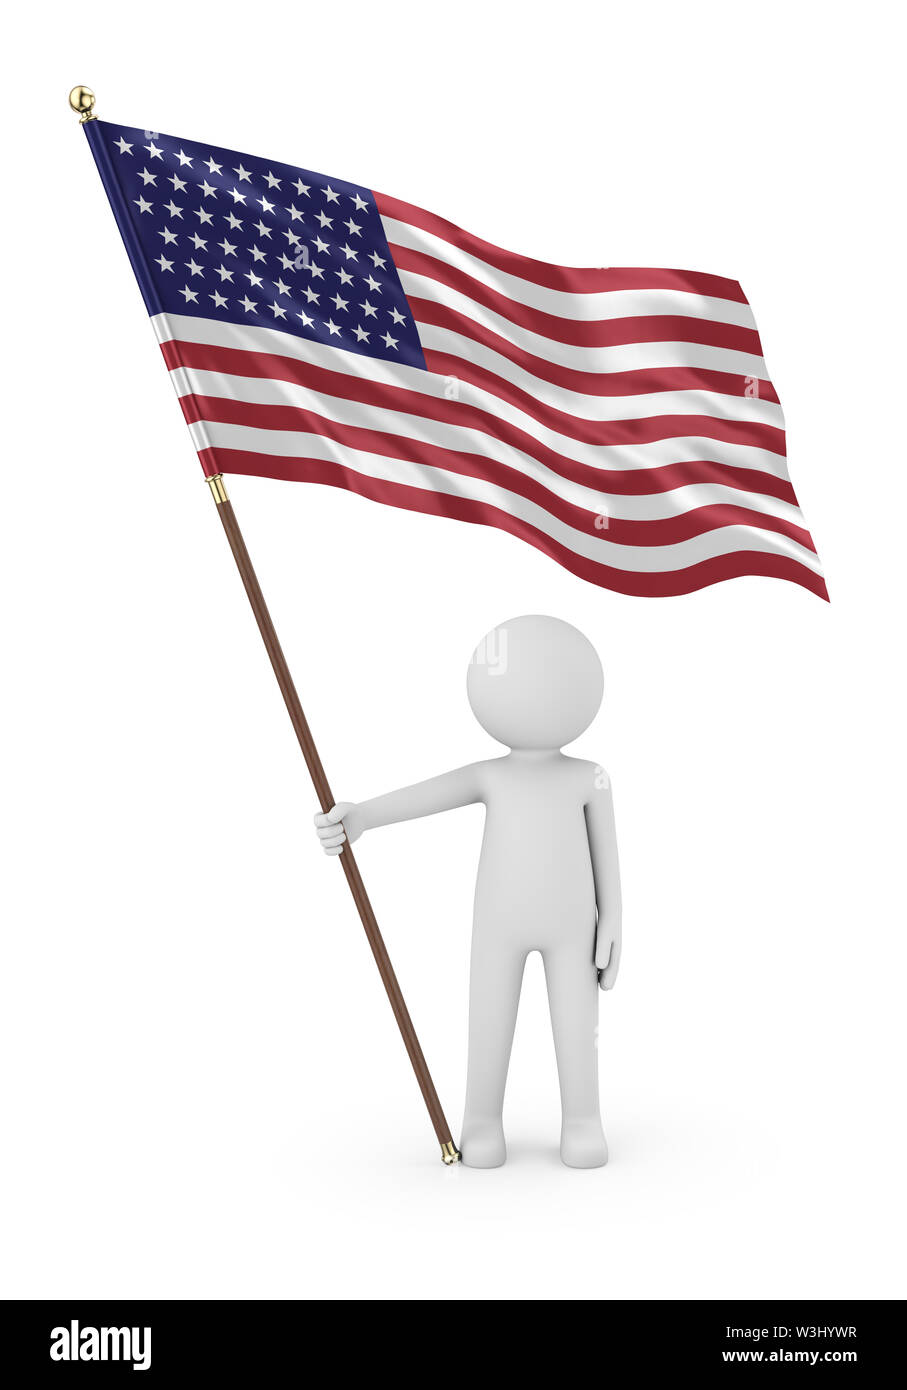 American Patriot Stickman Holding National Flag of the United States of America 3D Illustration On White Background Stock Photo